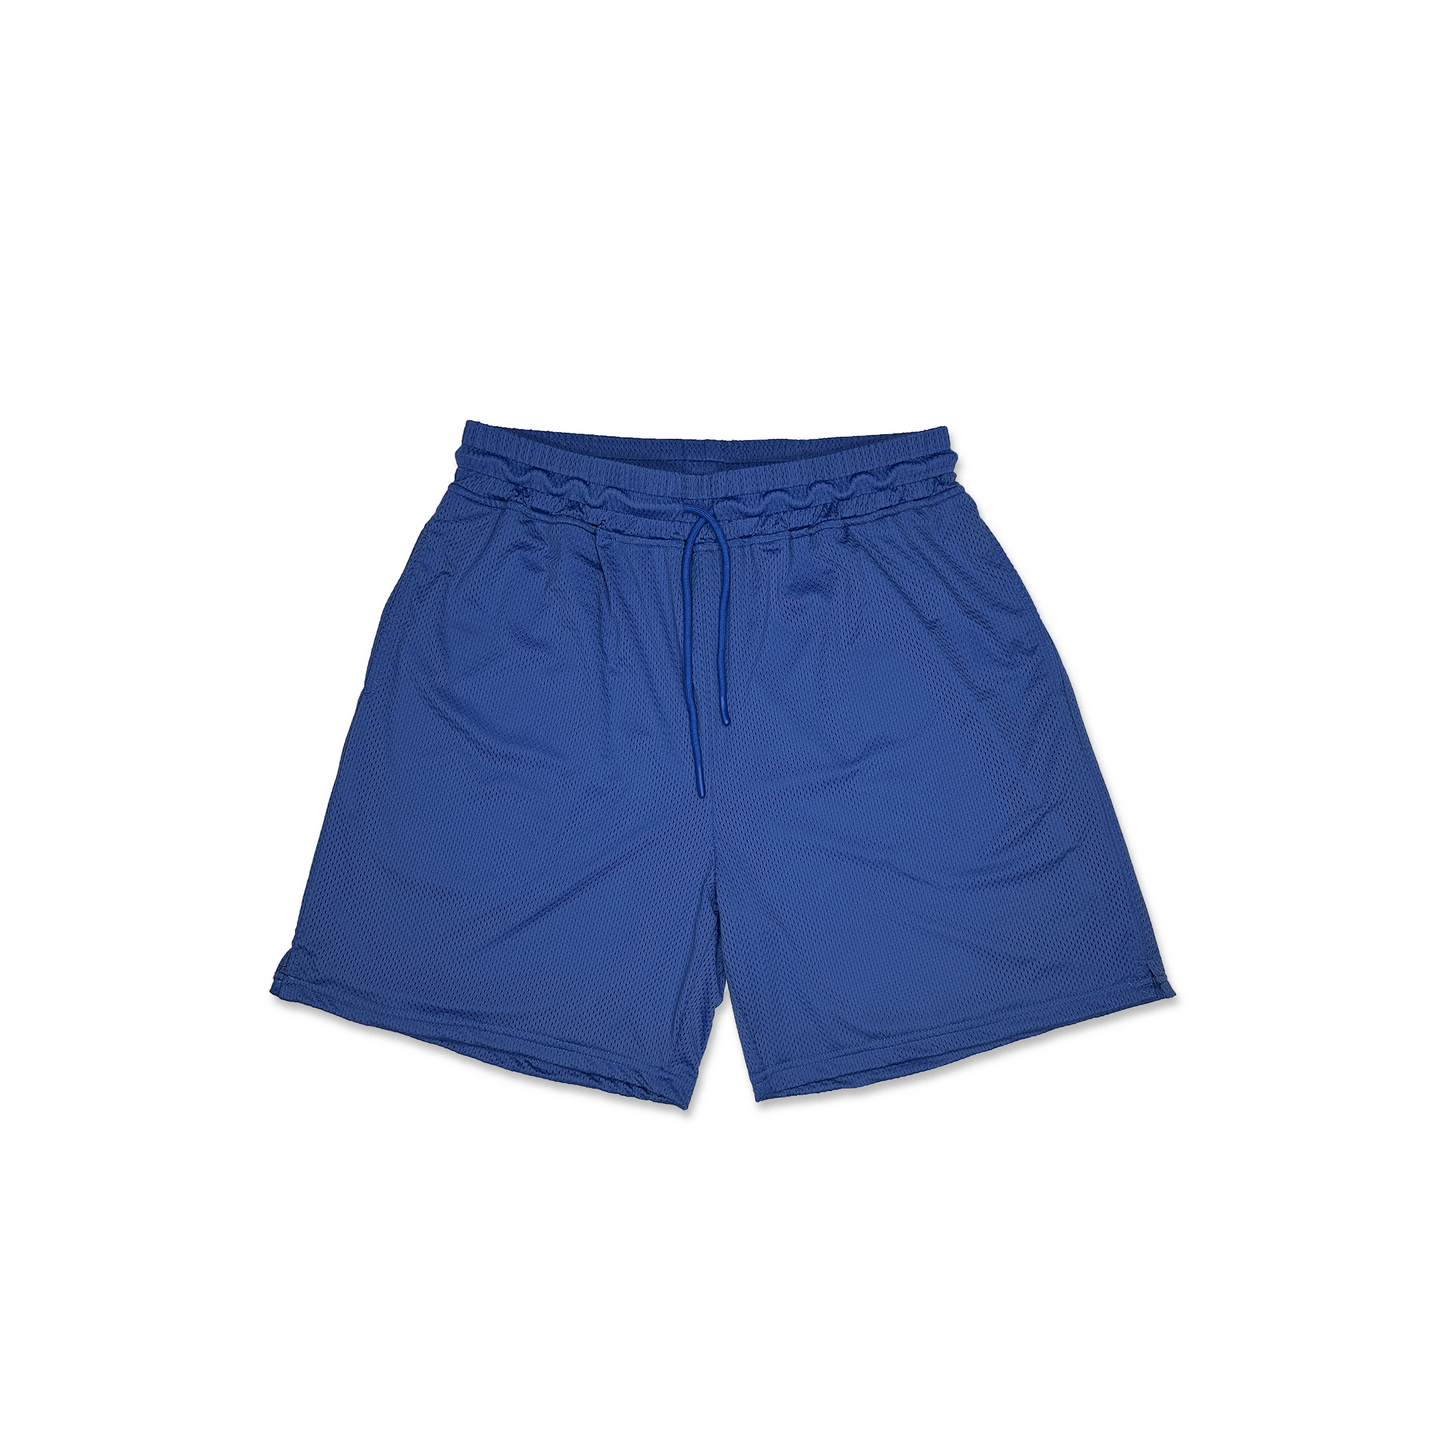 Double Layered Mesh Shorts – eightyfiveclo